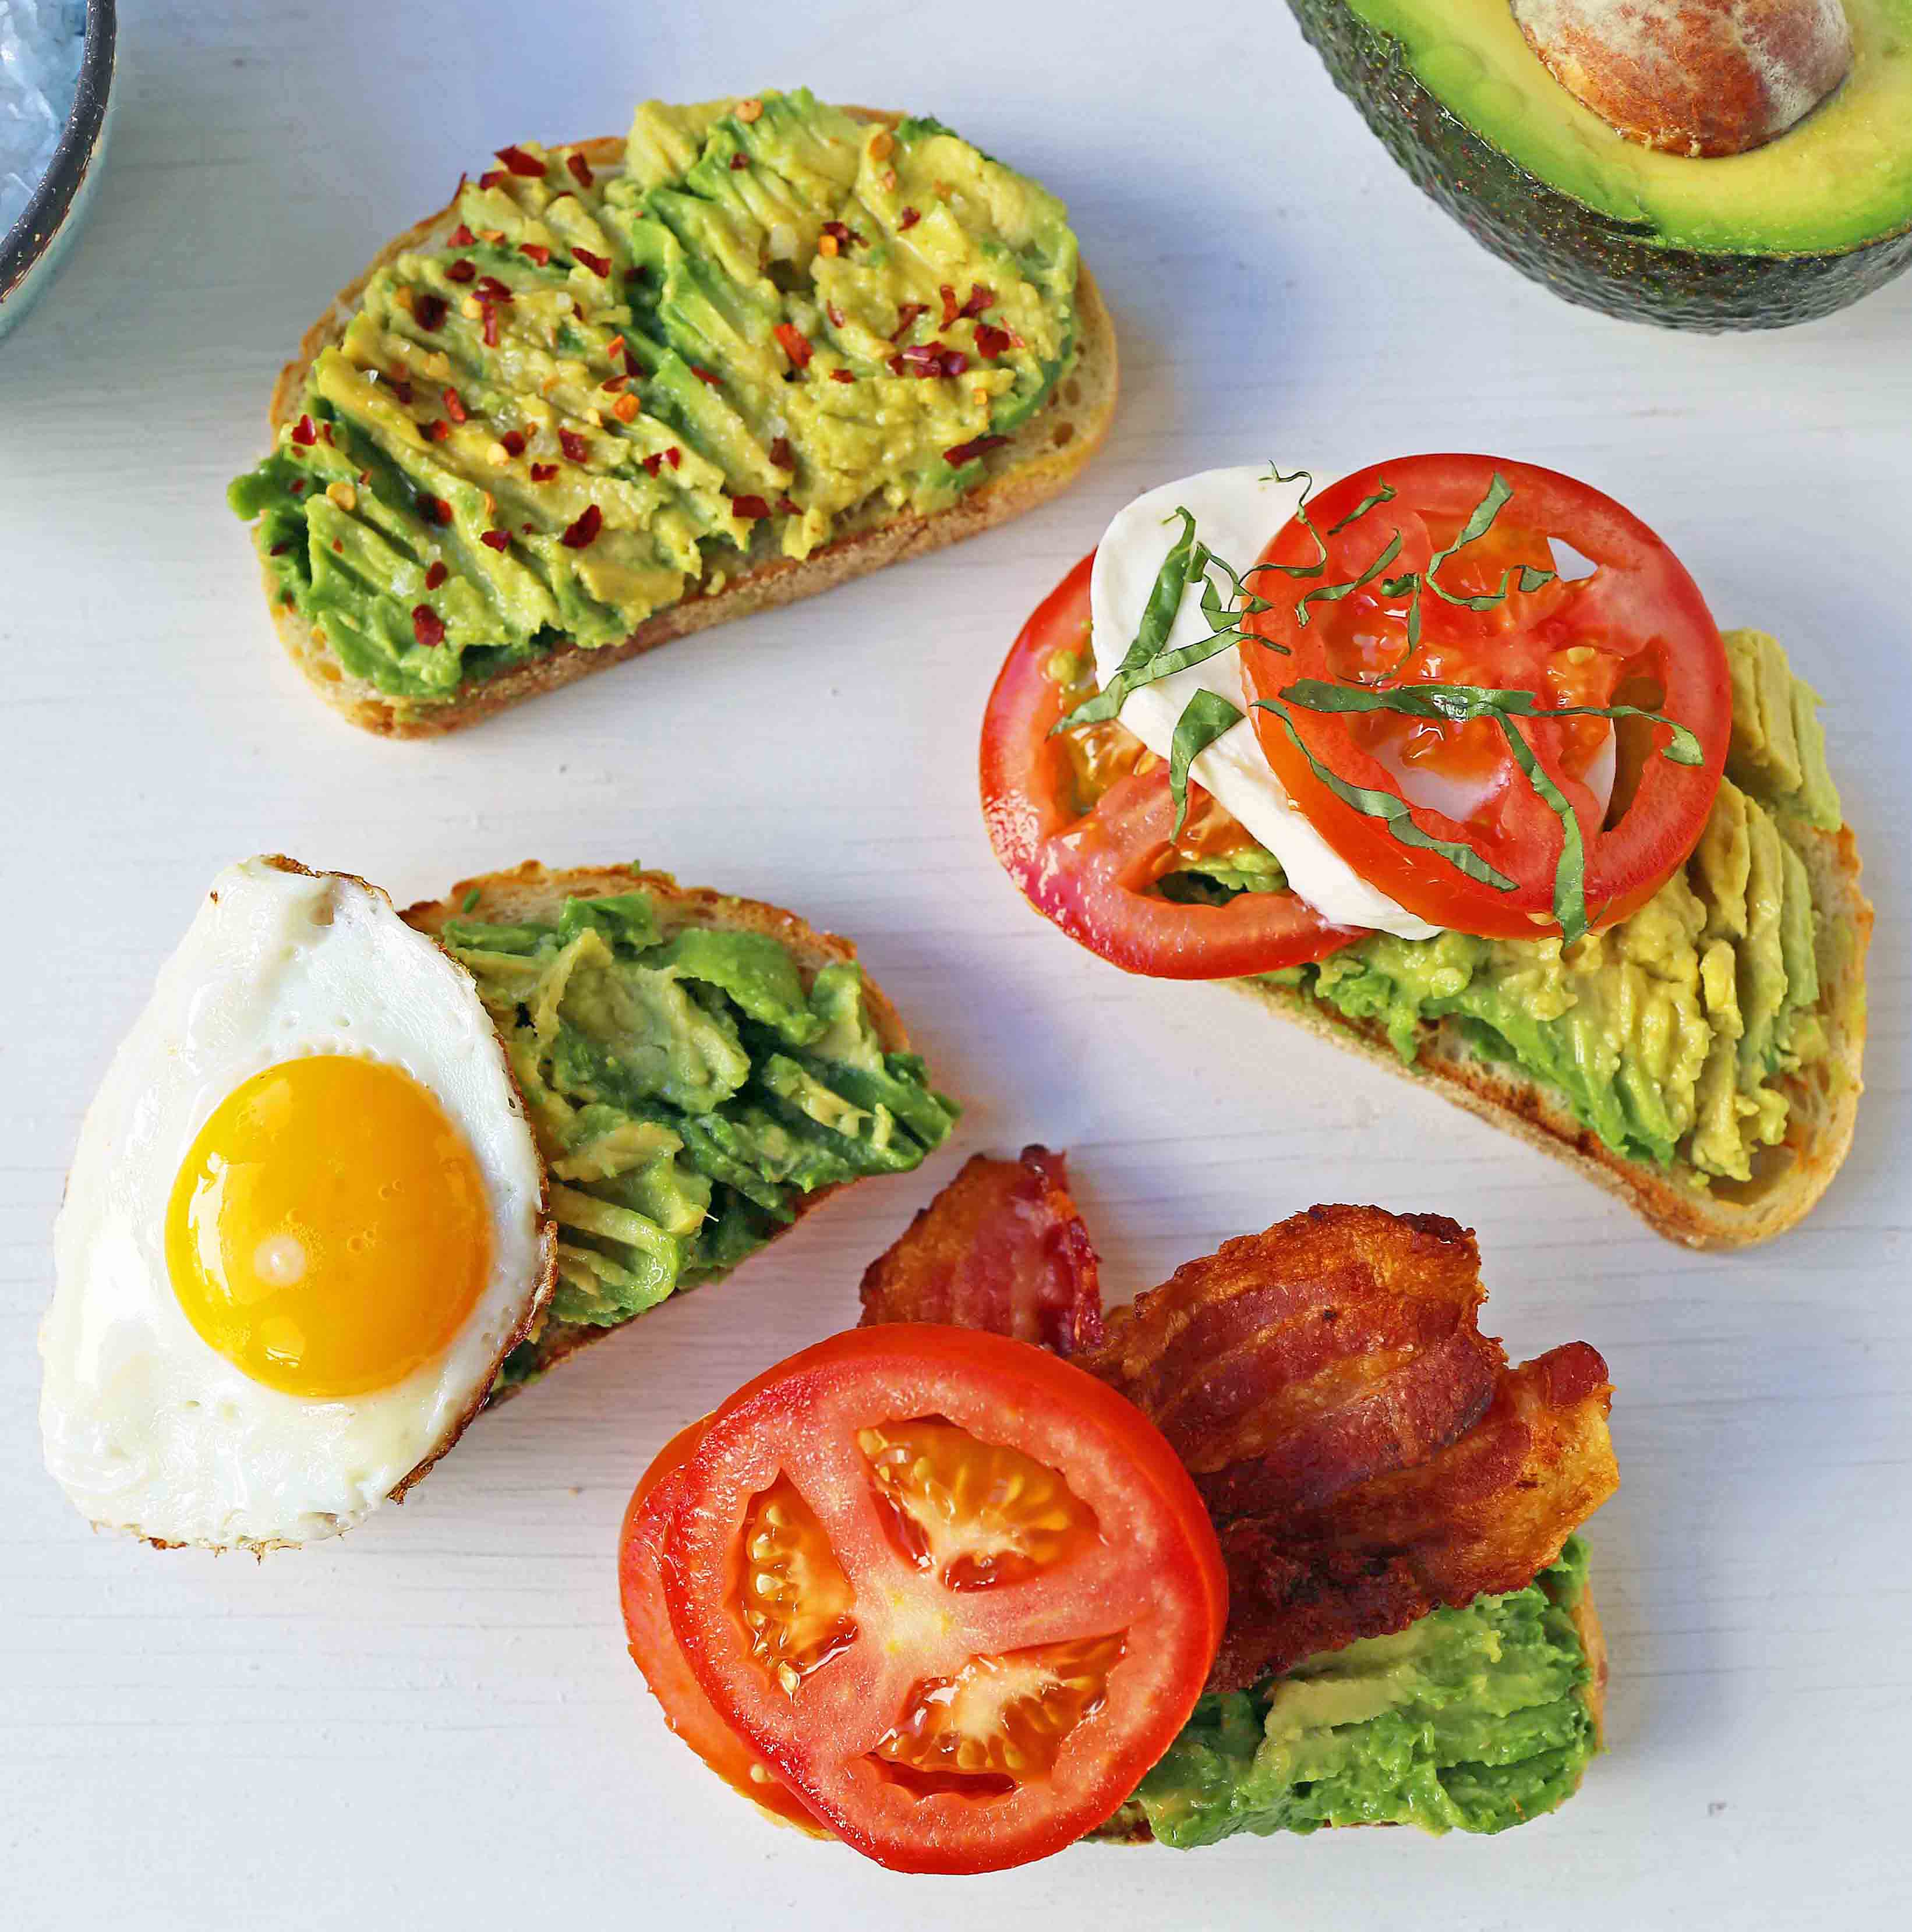 Avocado Toast -- 4 Ways. How to make perfect avocado toast. Caprese Avocado Toast, BAT Bacon Avocado Tomato Avocado Toast, Fried Egg Avocado Toast, Avocado Toast with Sea Salt and Chili Flakes. Tips and tricks for making the best avocado toast. www.modernhoney.com #avocadotoast #avocados #avocado 